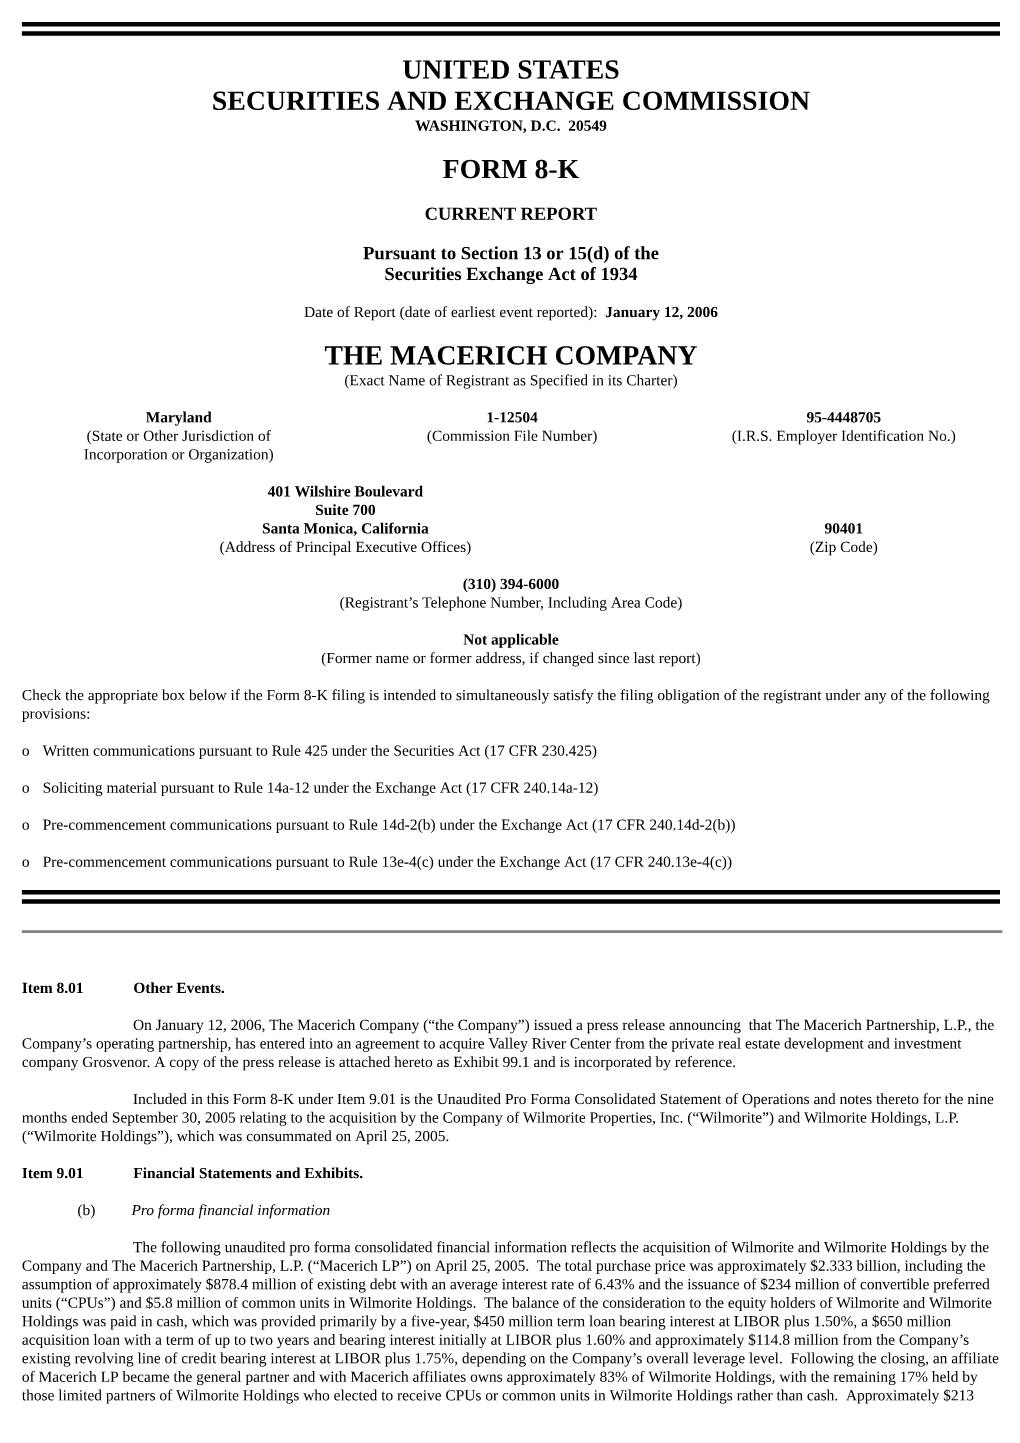 United States Securities and Exchange Commission Form 8-K the Macerich Company